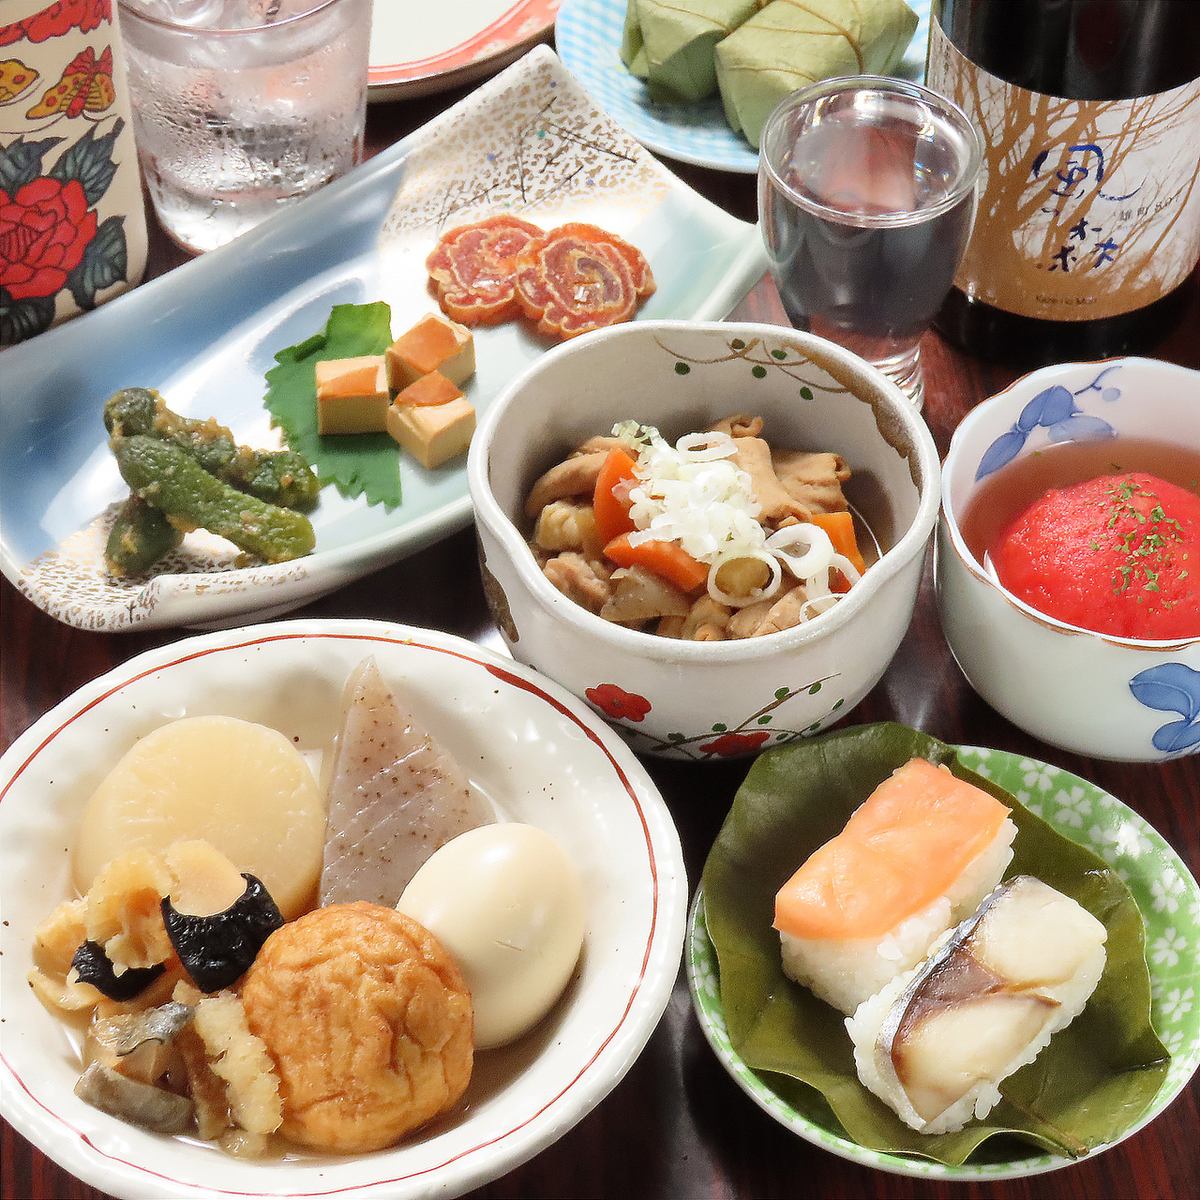 Enjoy the proprietress' home-cooked meals and Nara sake at a hideout.